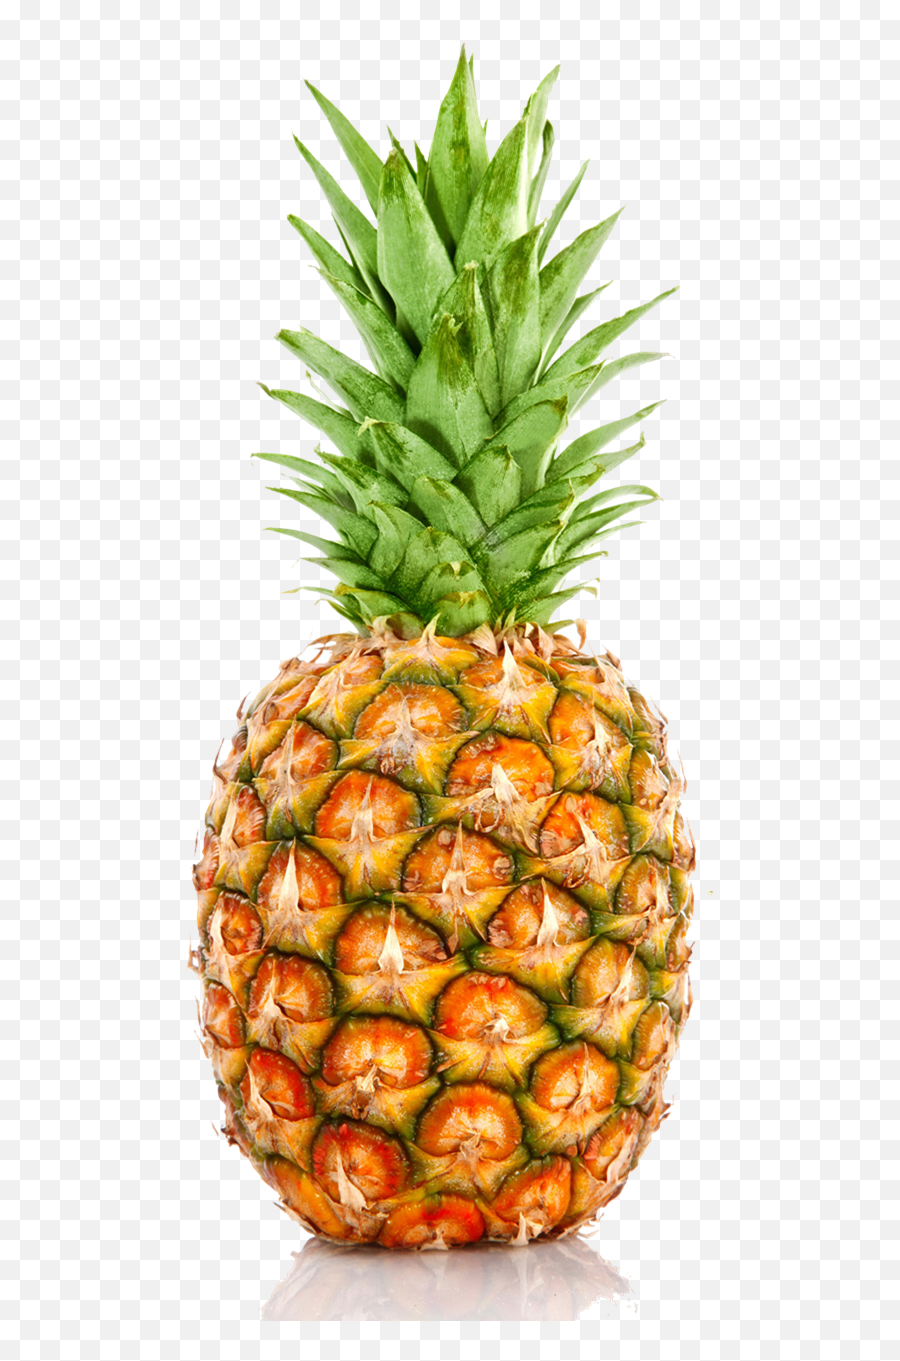 Download Hd Pineapple Png Background - Individual Pictures Of Fruits And Vegetables,Vegetables Transparent Background